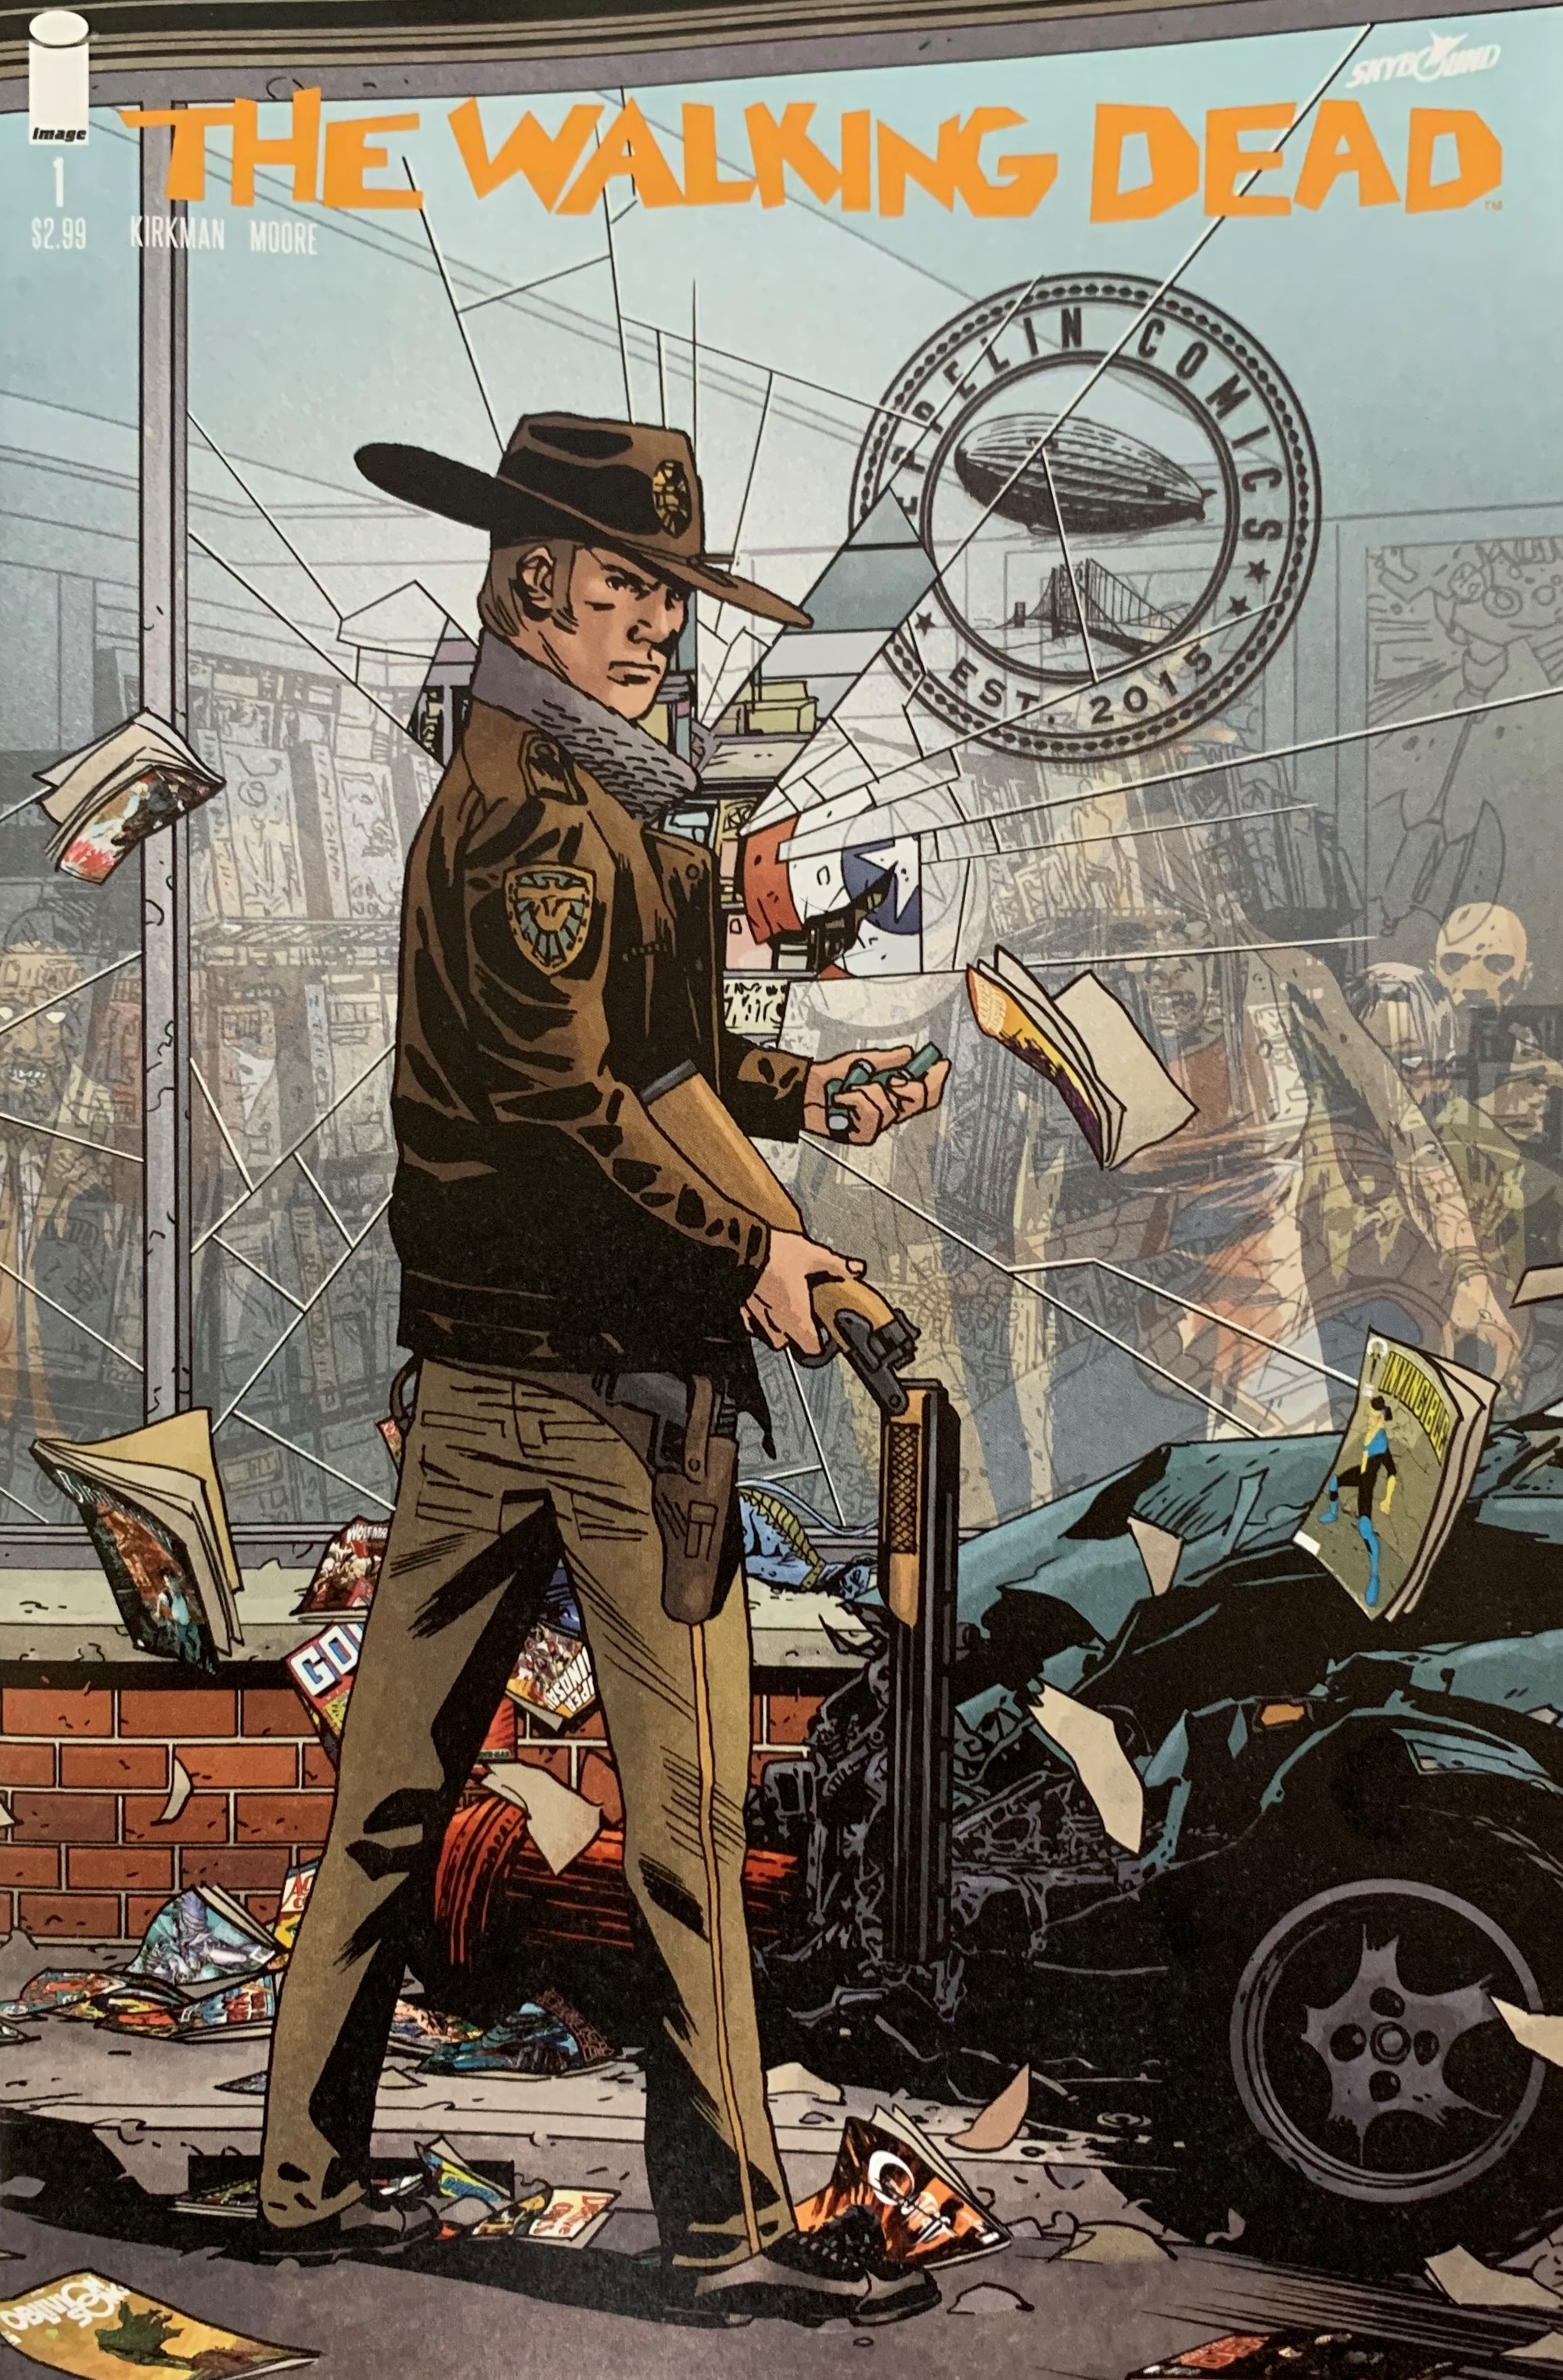 The Walking Dead #1 15 Year Anniversary Store Exclusive